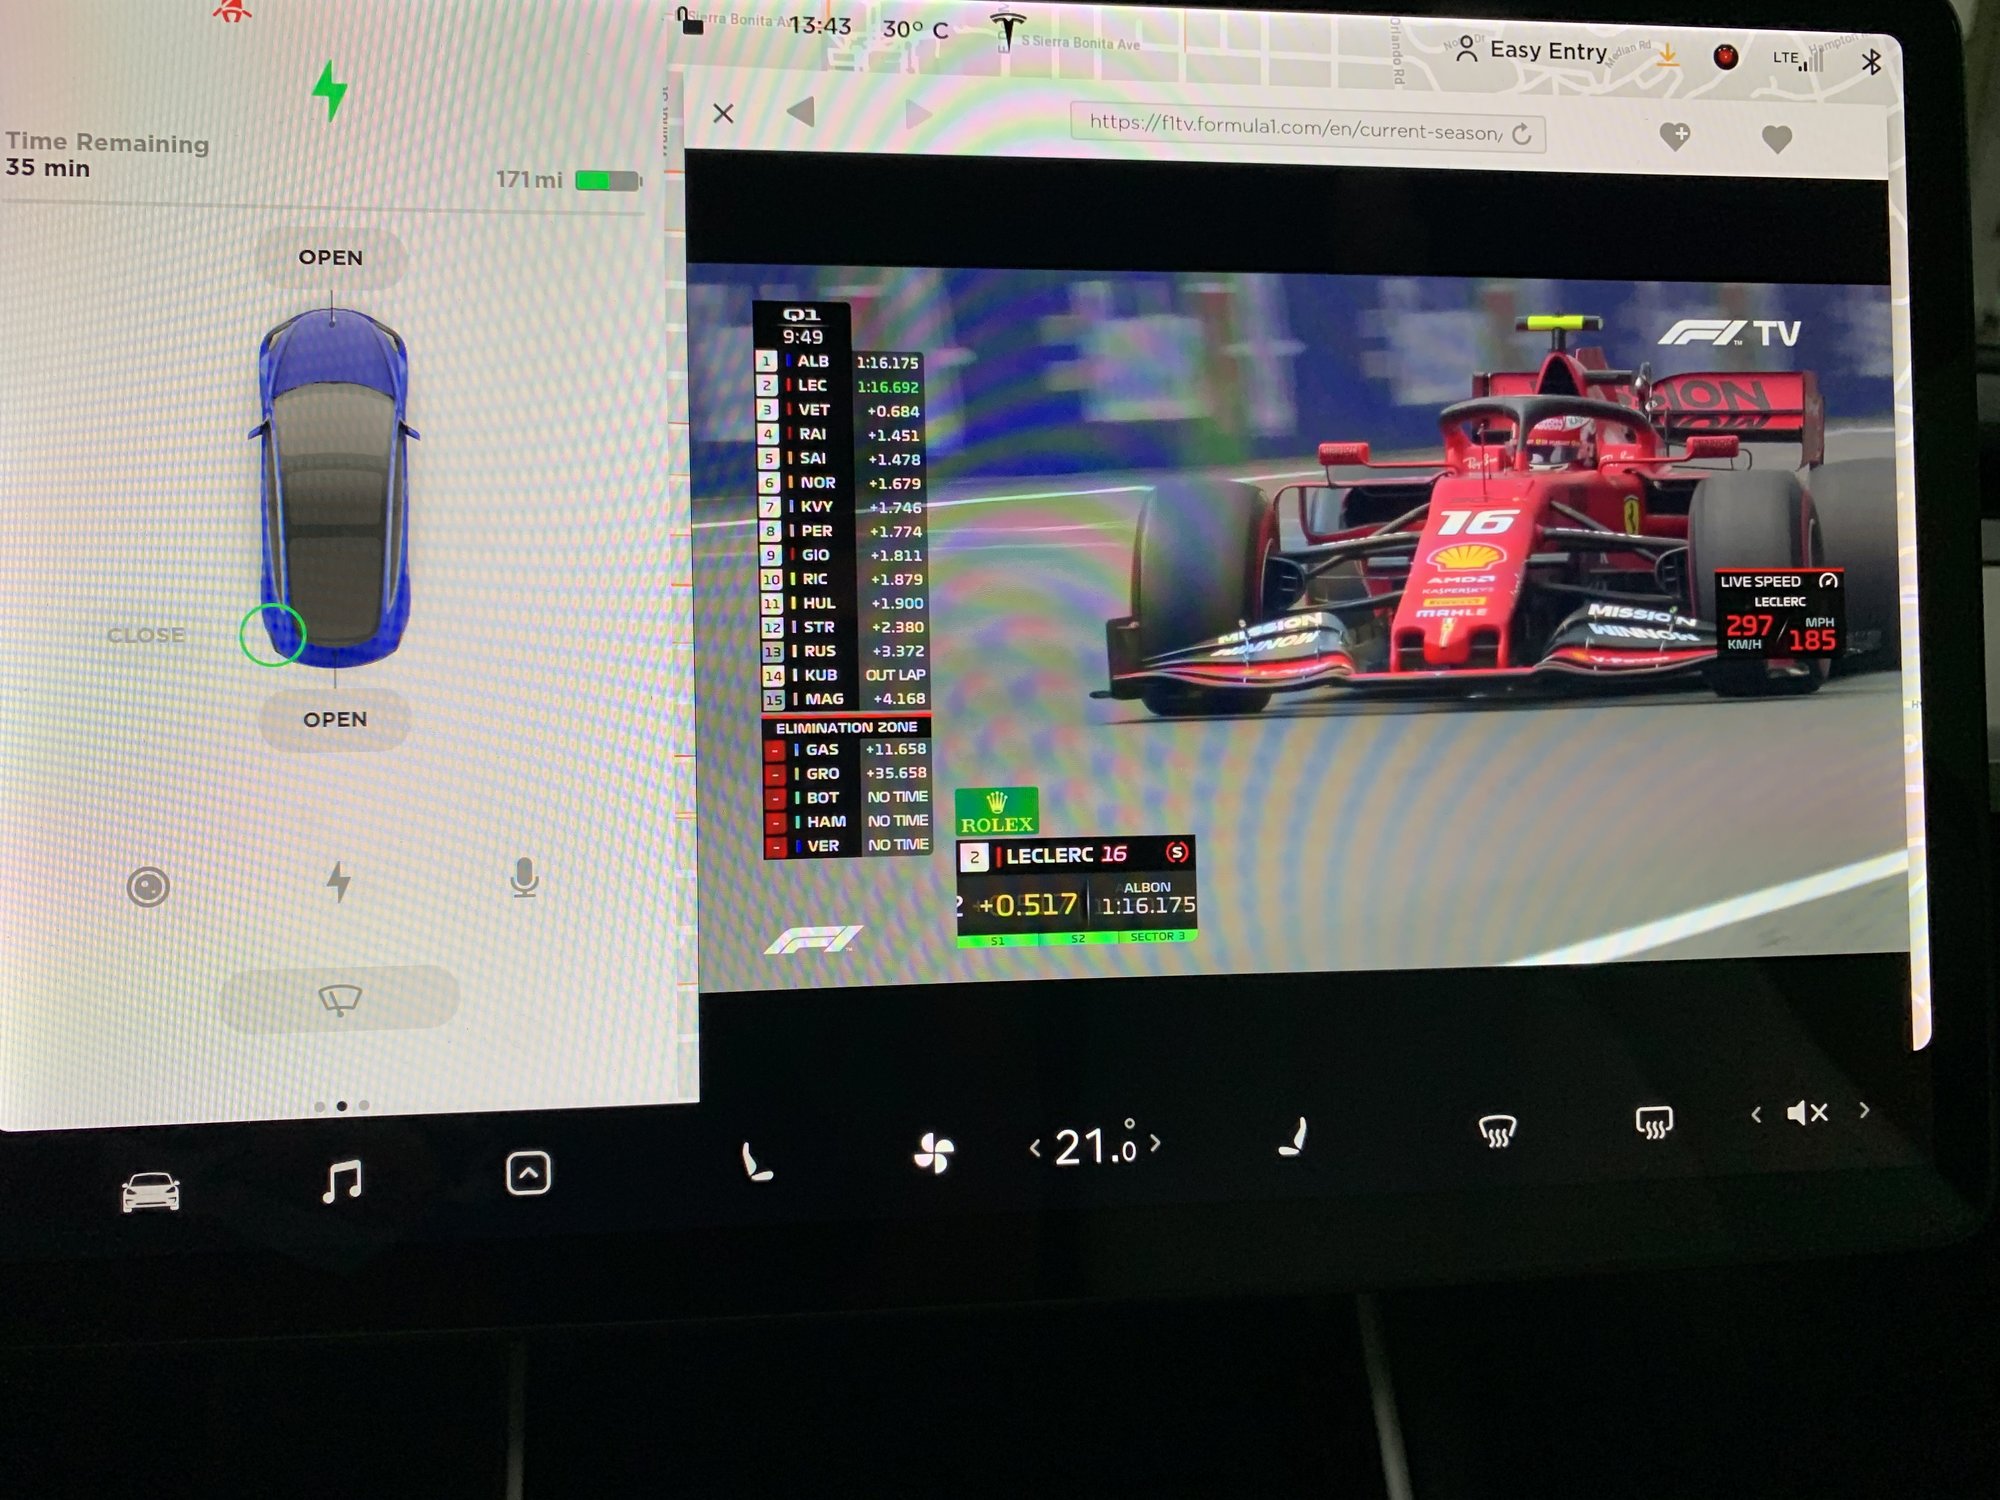 You can now Watch videos in the browsers Update only while in Park Tesla Motors Club